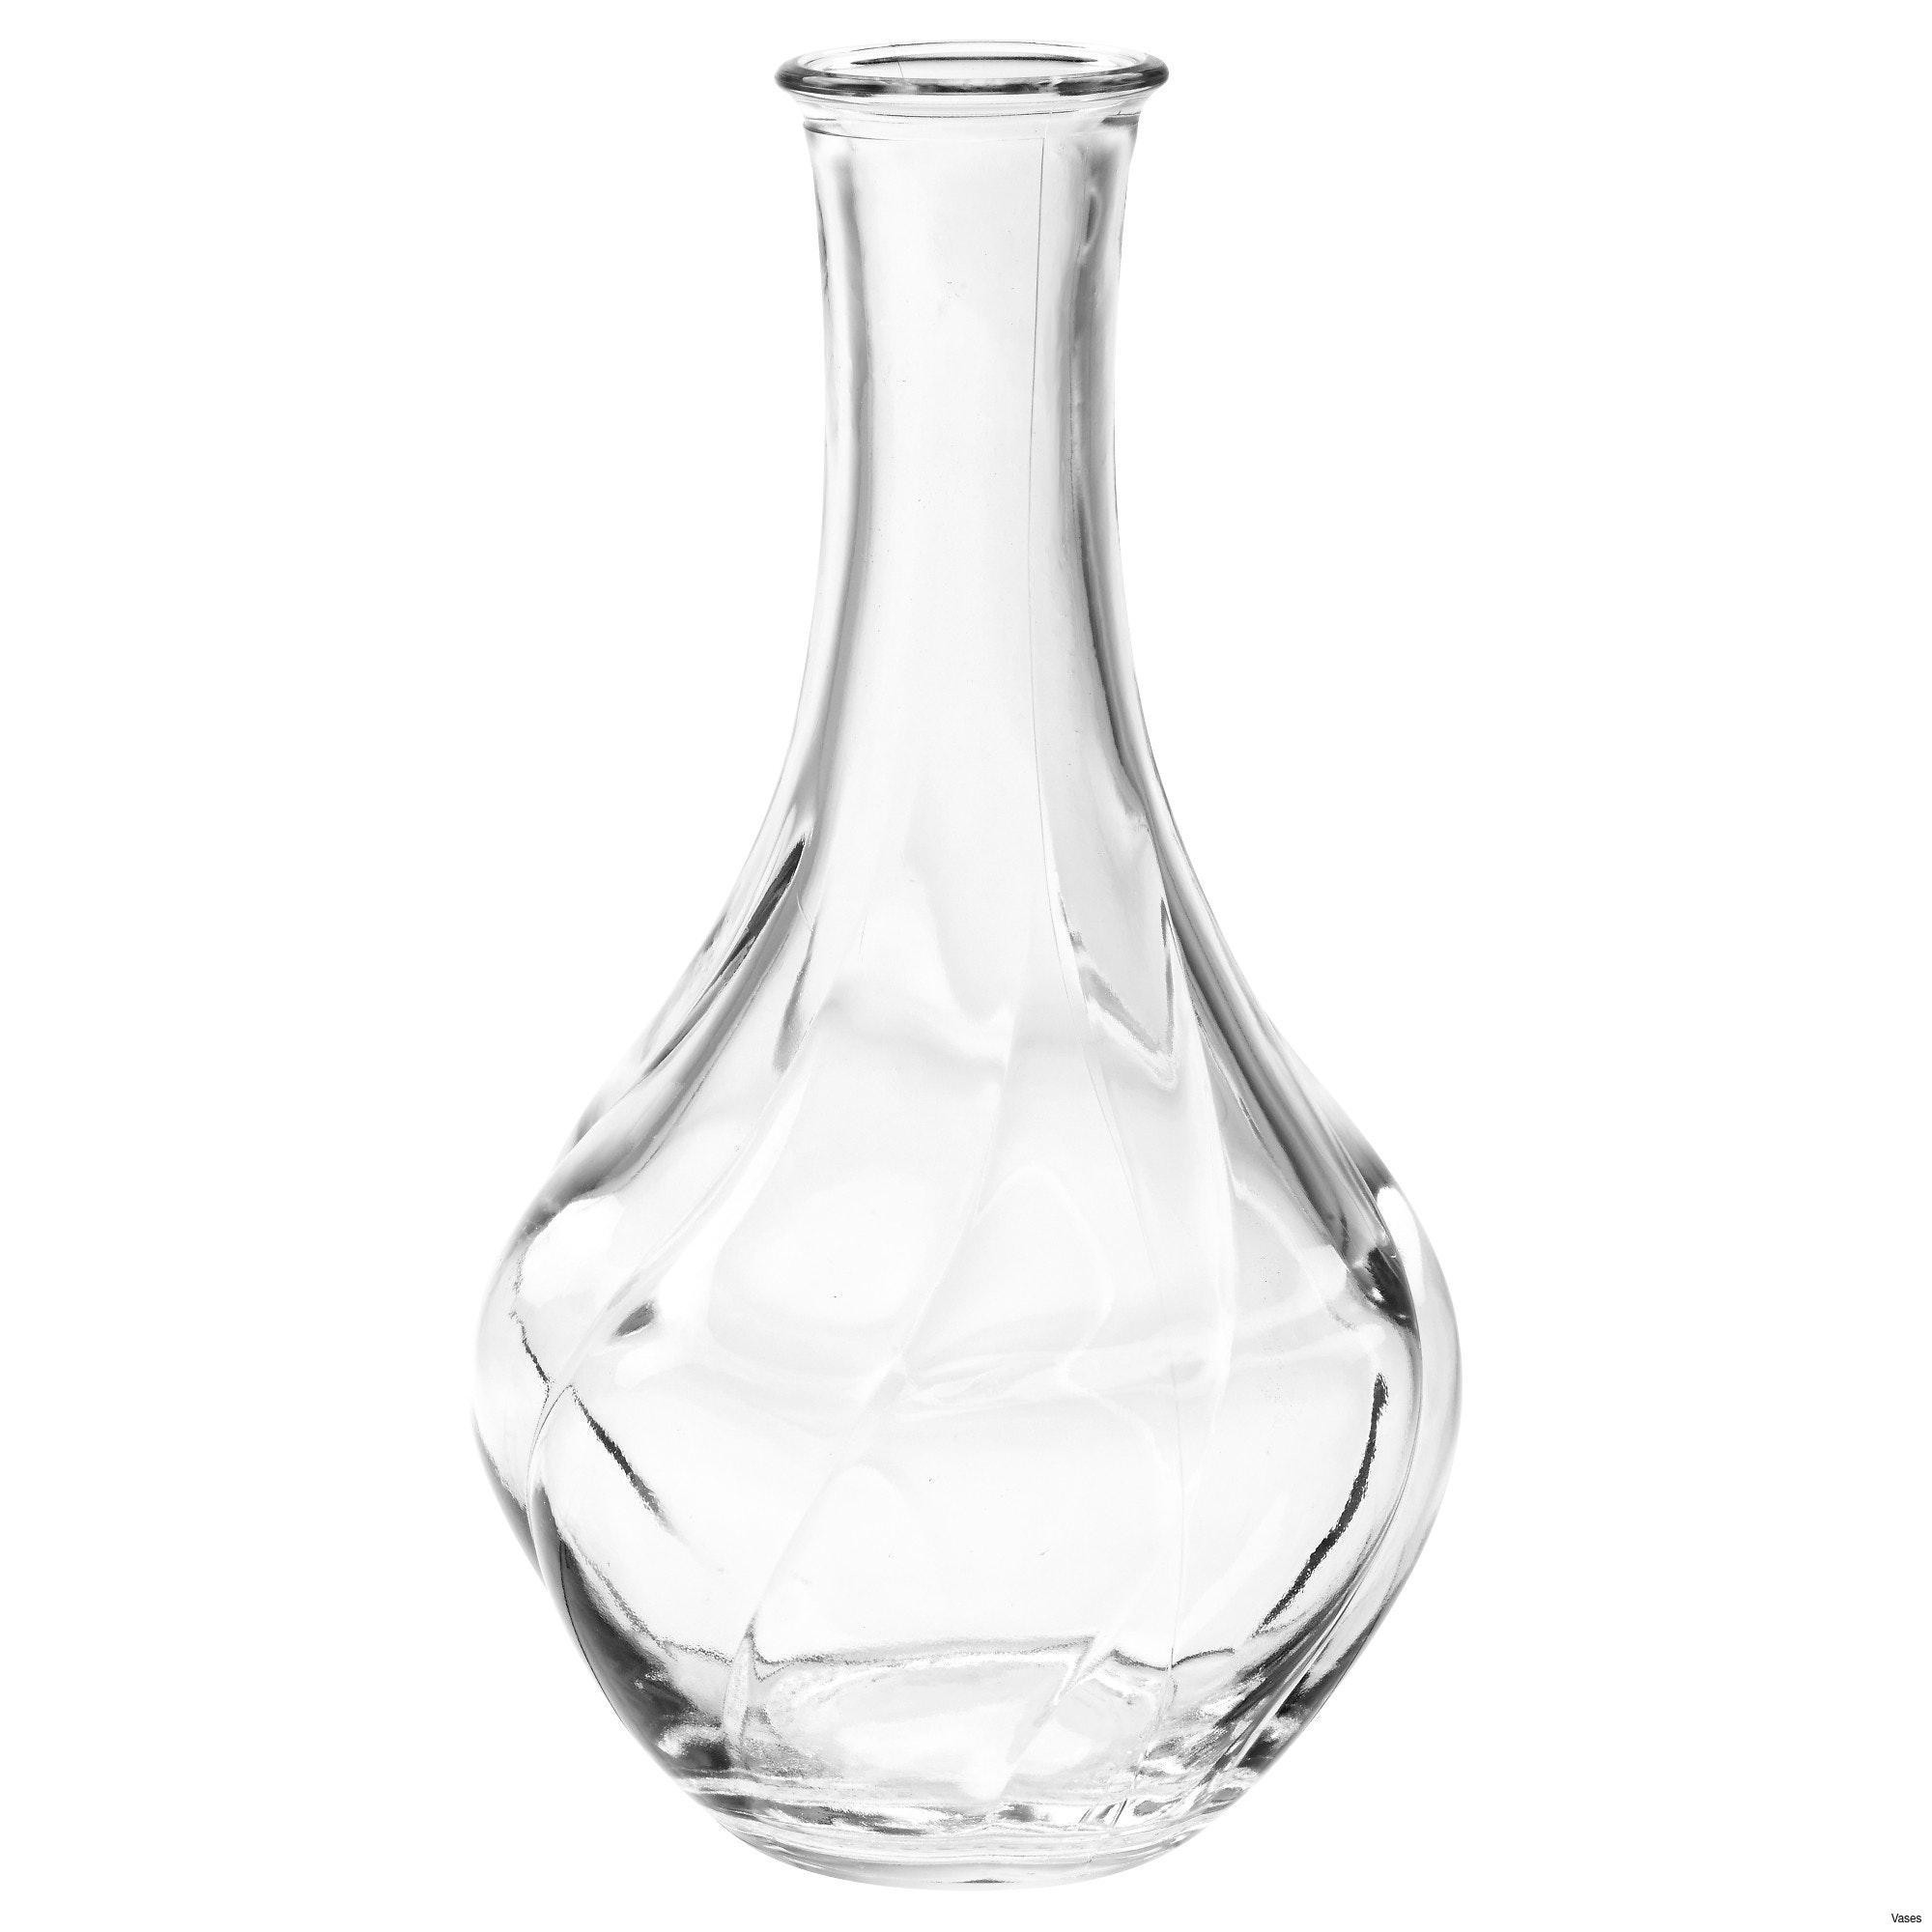 living room vase of large glass vase gallery living room glass vases fresh clear vase 0d with large glass vase gallery living room glass vases fresh clear vase 0d tags amazing and of